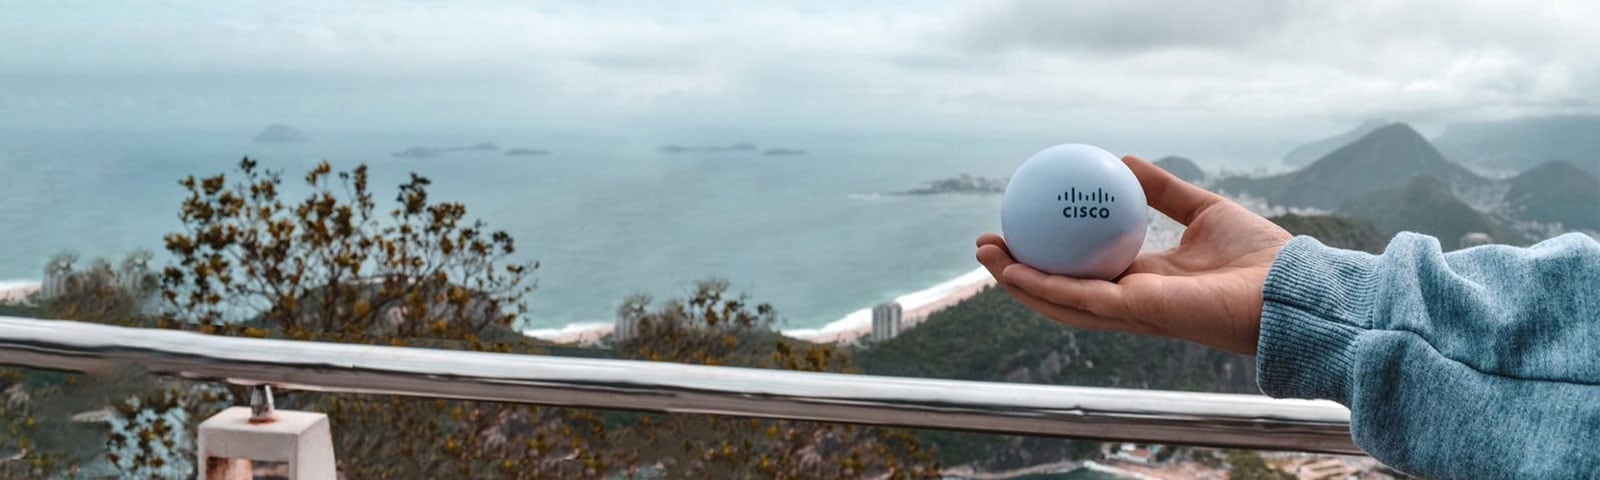 A hand holding a Cisco ball in palm of hand against a mountain and ocean background in Brazil